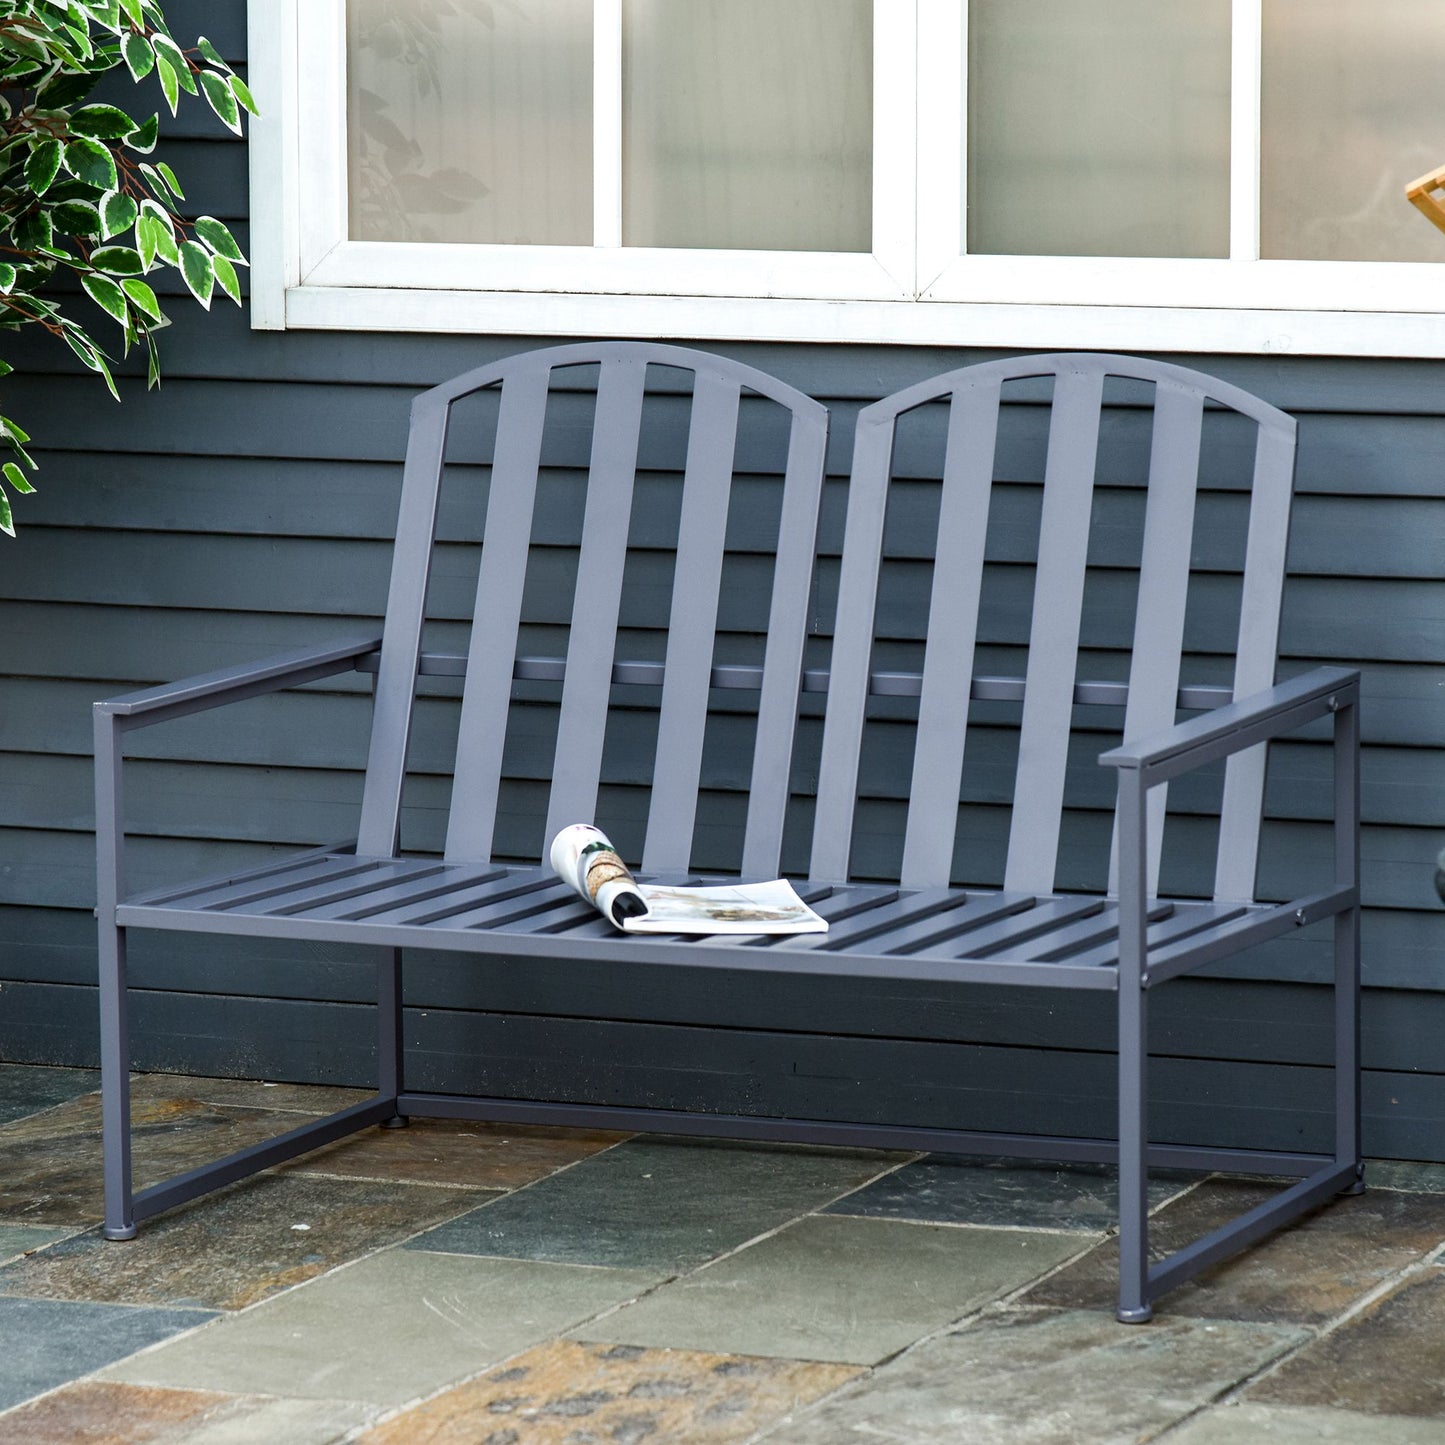 Outsunny Steel Patio Garden Bench Loveseats for Outdoors Park Yard Slatted Design Grey